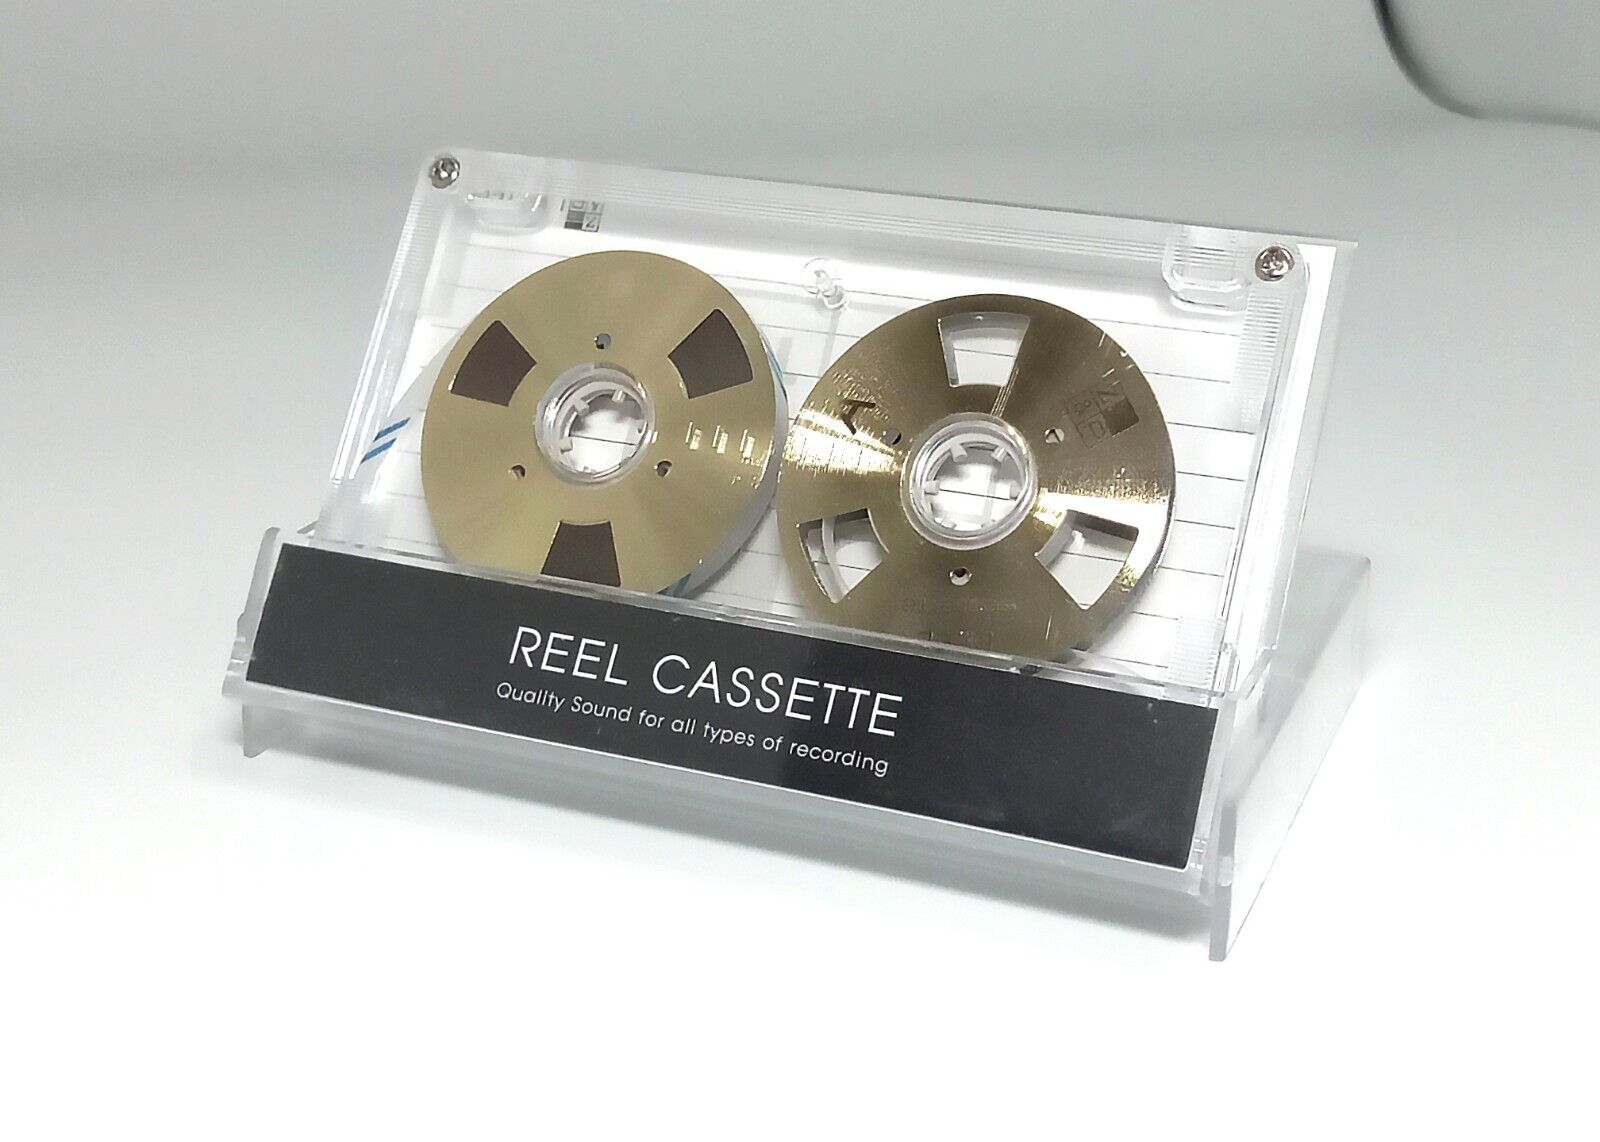 Reel to Reel cassette tape self-made high quality design Gold